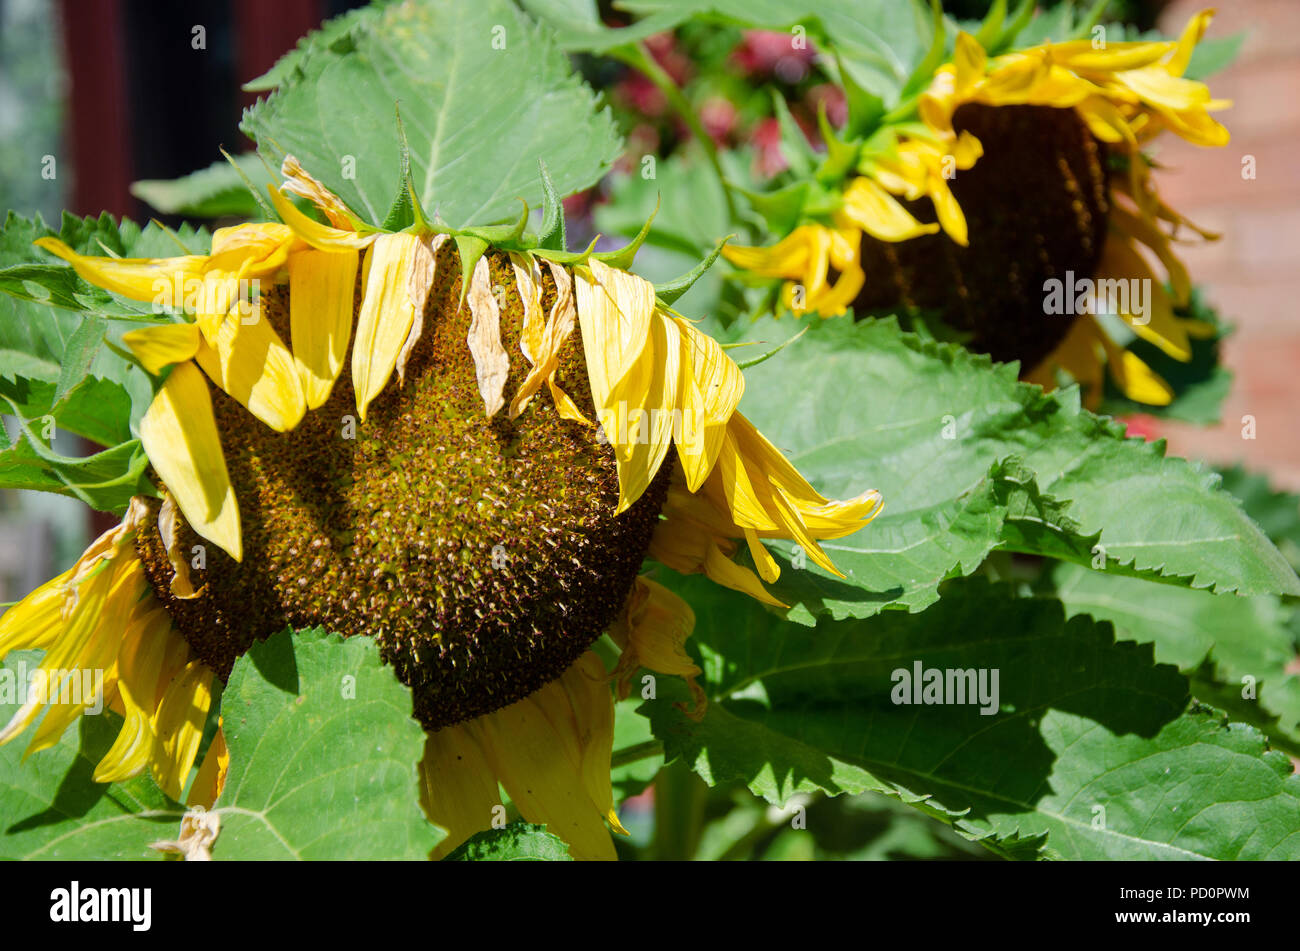 Sunflower flowers suffering in the heat and getting past their best. Stock Photo